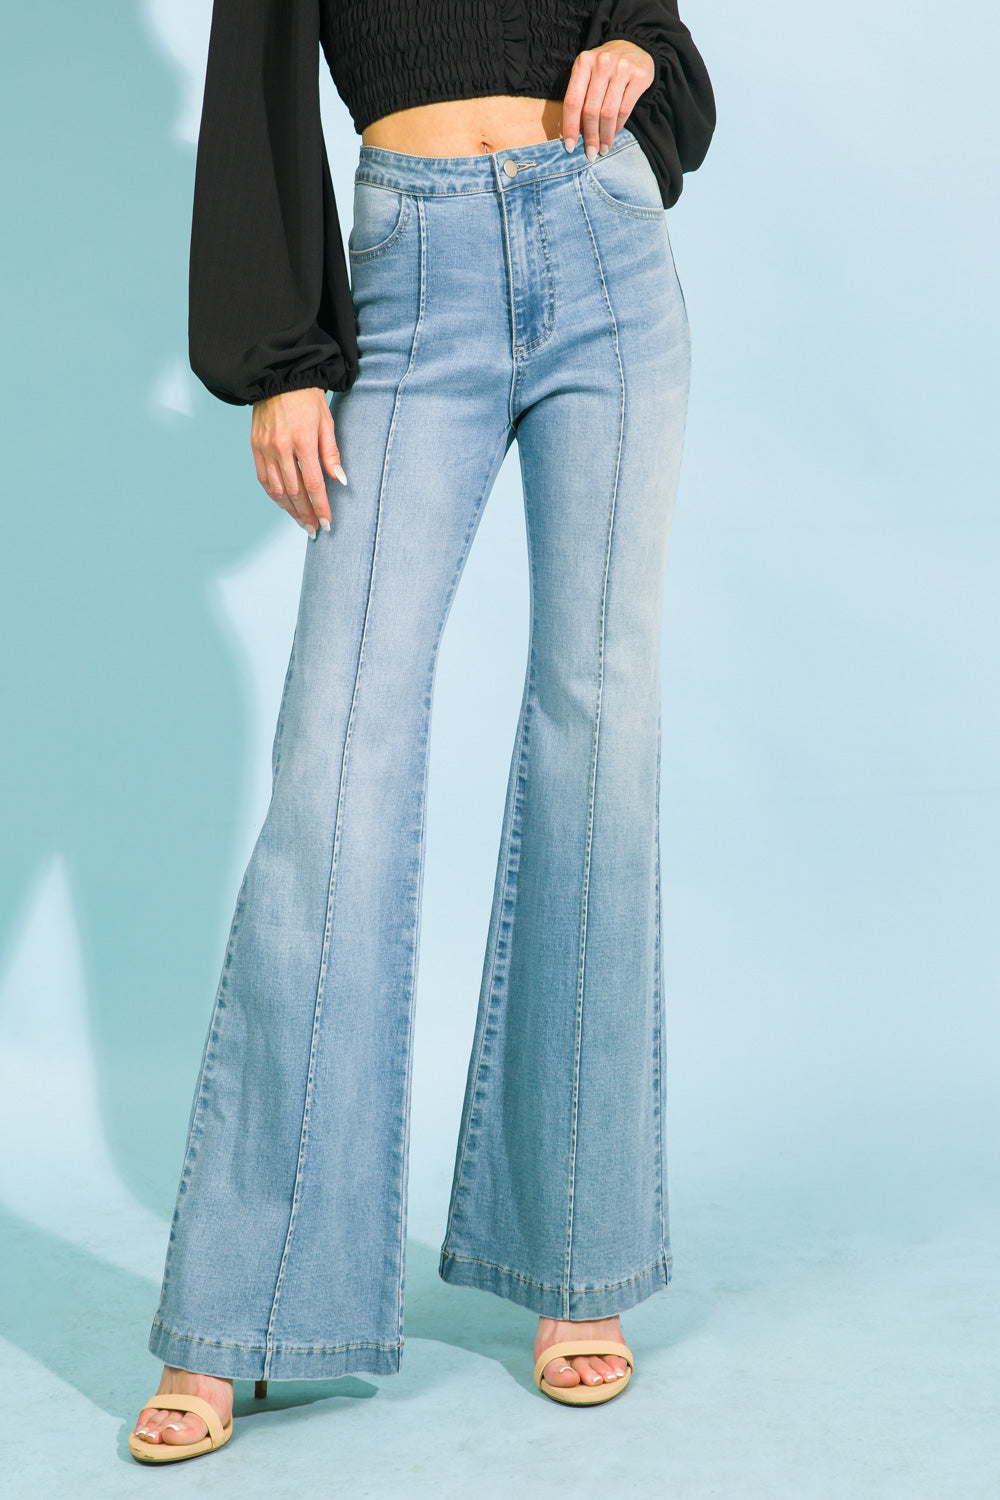 Women's Flare Jeans | Women's Flares | Painted Cowgirl Western Store